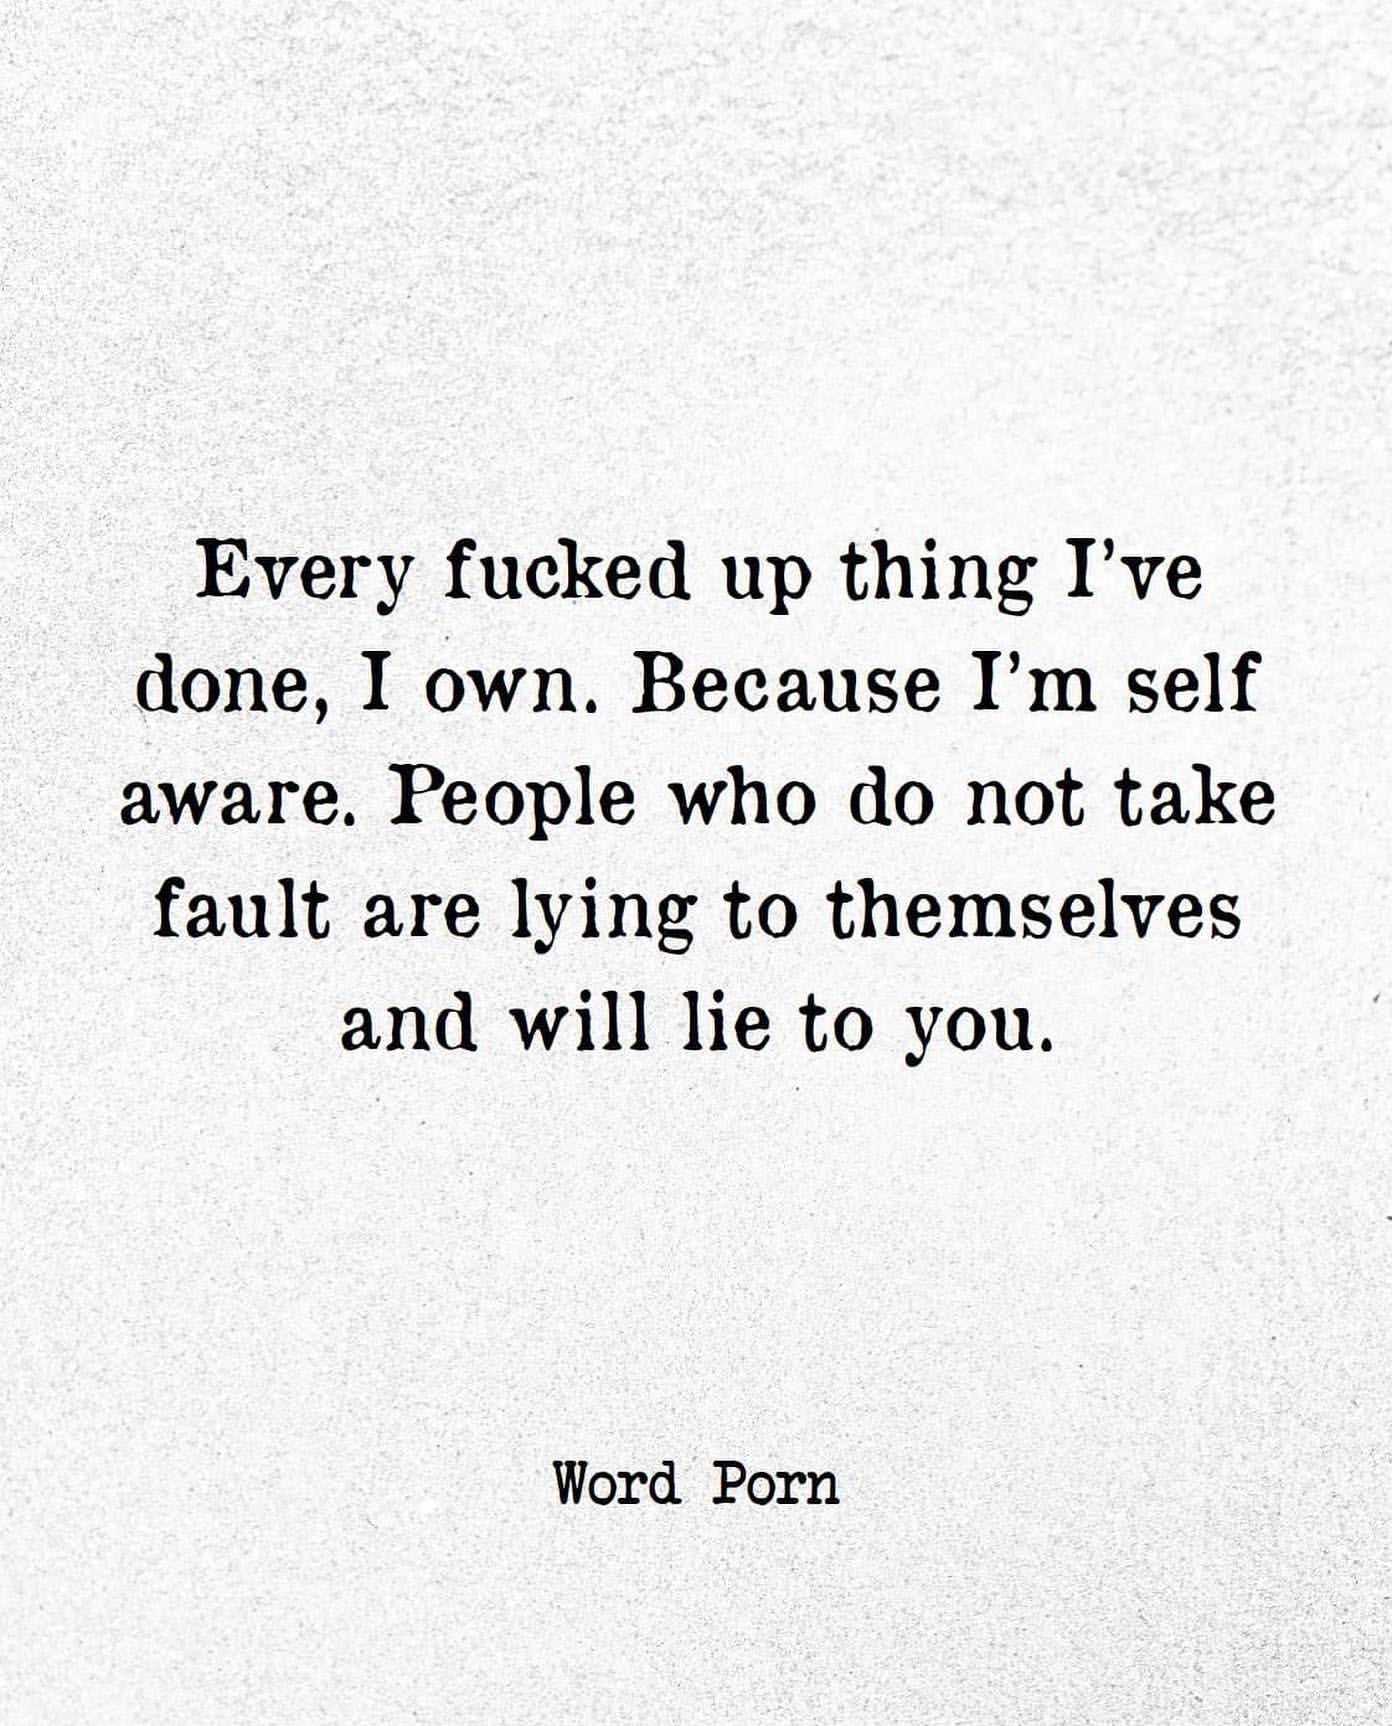 Every fucked up thing I've done, I own. Because I'm self aware. People who do not take fault are lying to themselves and will lie to you.